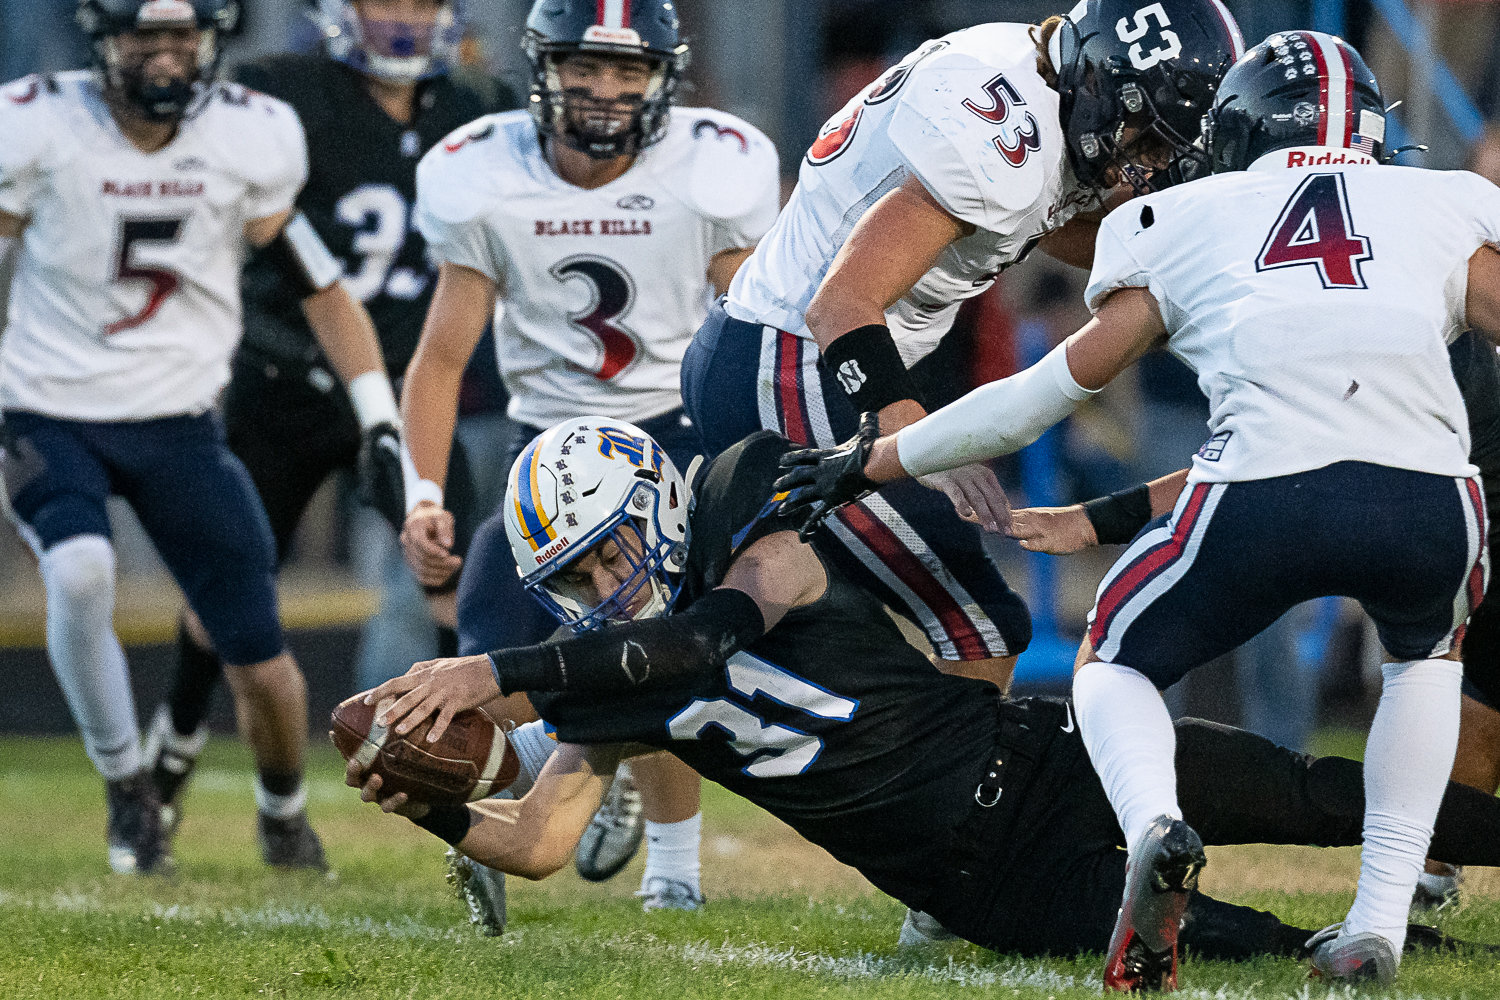 Rochester's James Morris dives for a touchdown in a 34-14 loss to Black Hills Sept. 16.